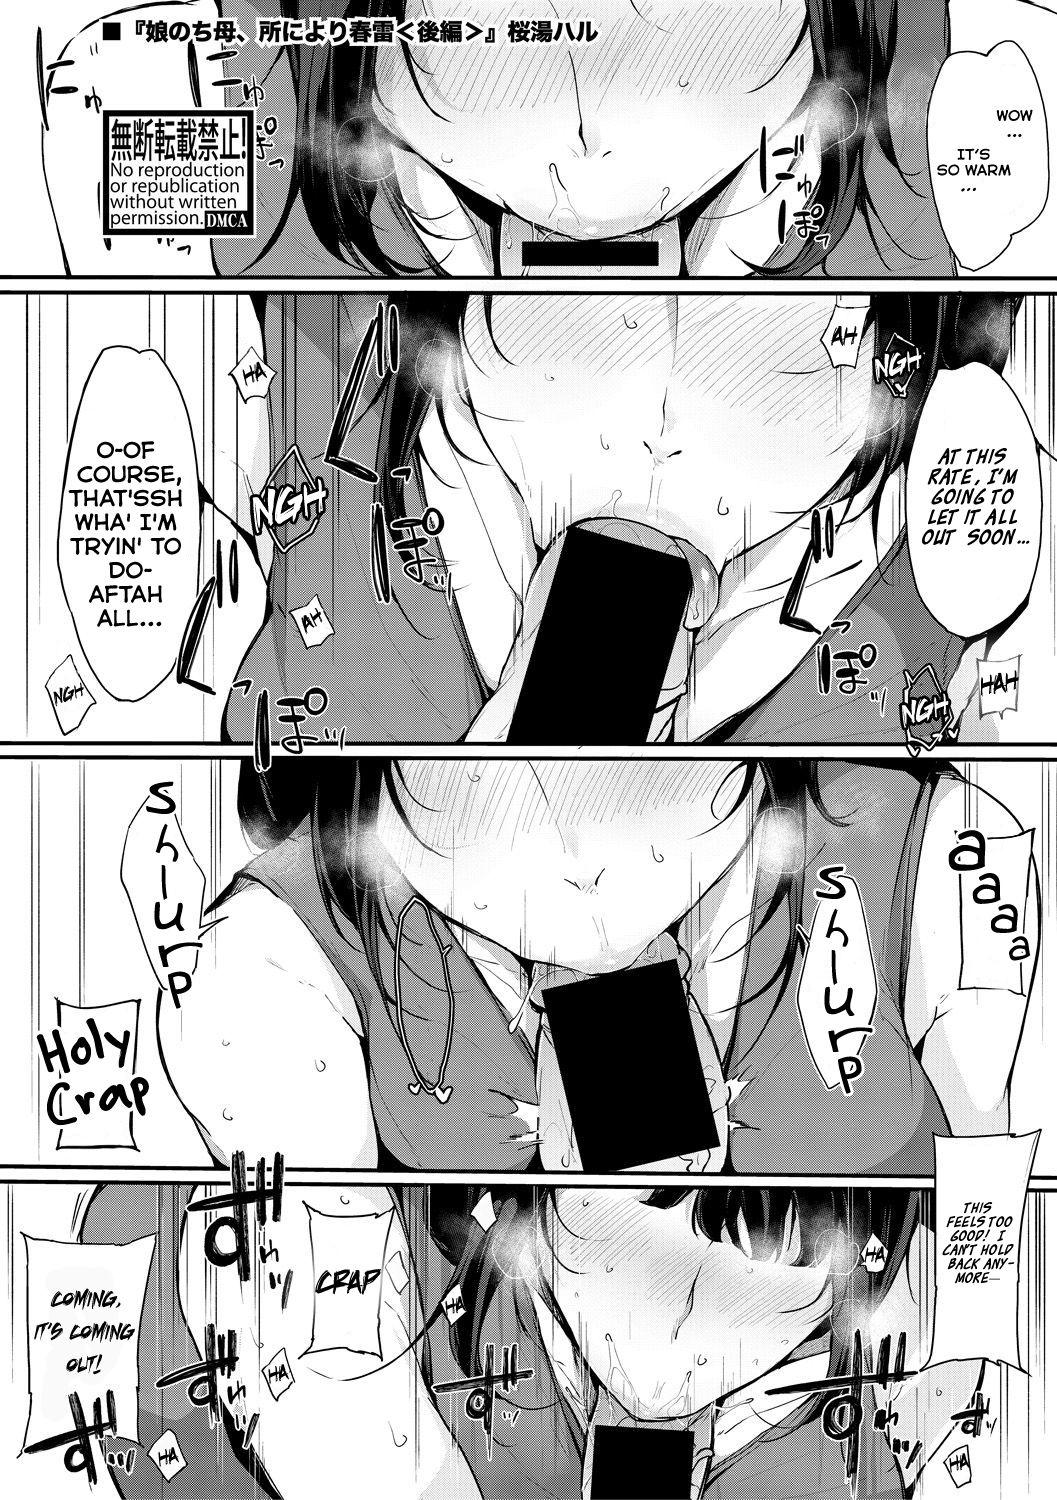 Transexual Musume Nochi Haha, Tokoroniyori Shunrai Kouhen | A Daughter followed by her Mother: A Spring Full of Thunders Fake Tits - Page 1